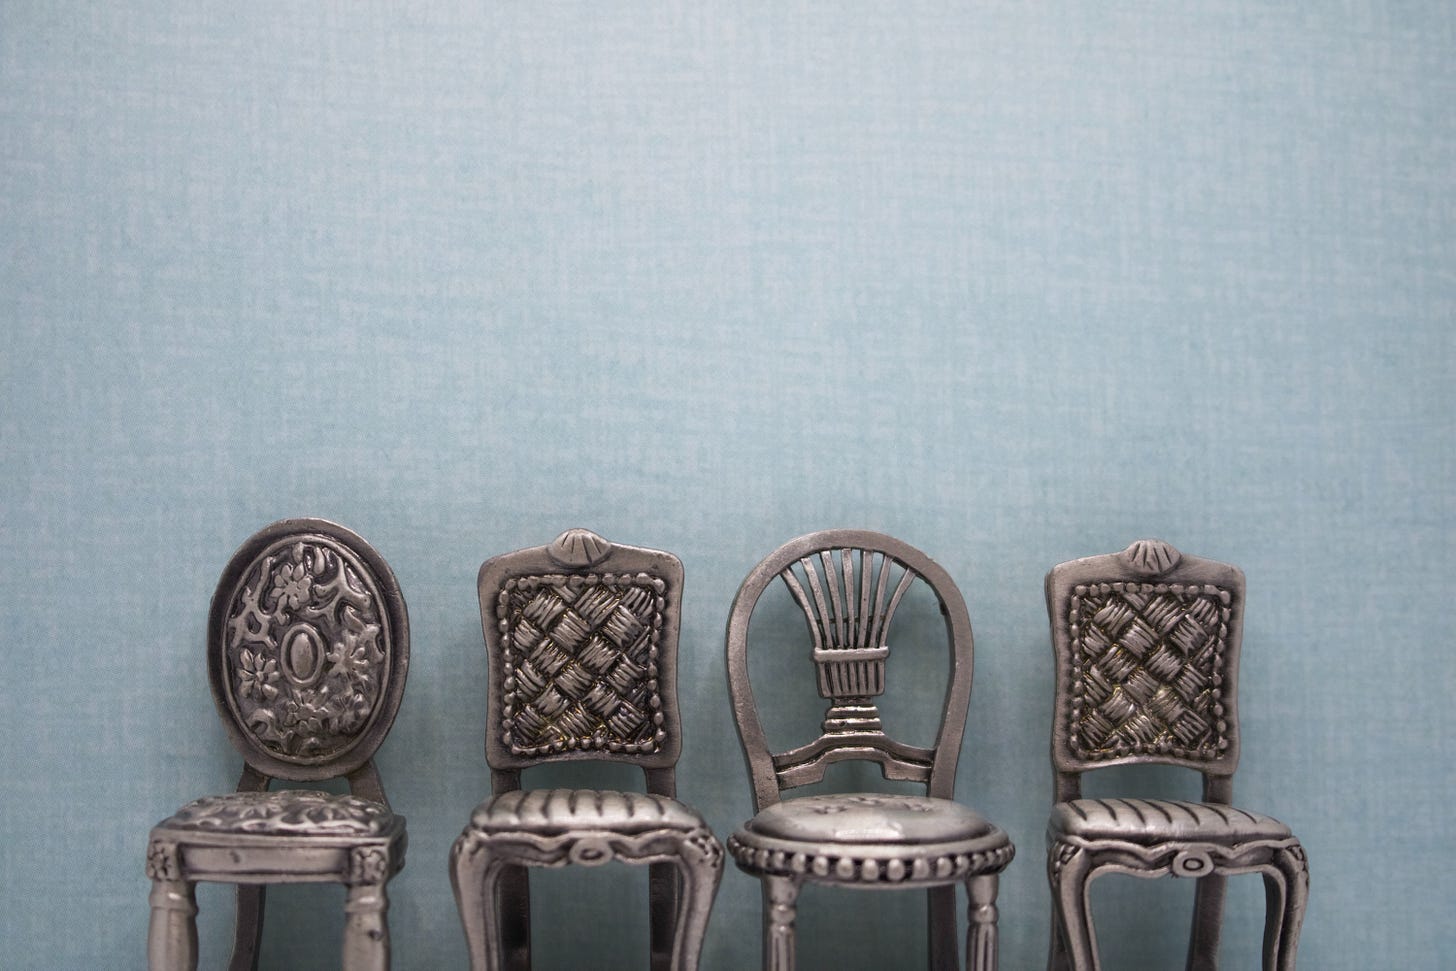 Metal chairs in front of blue background